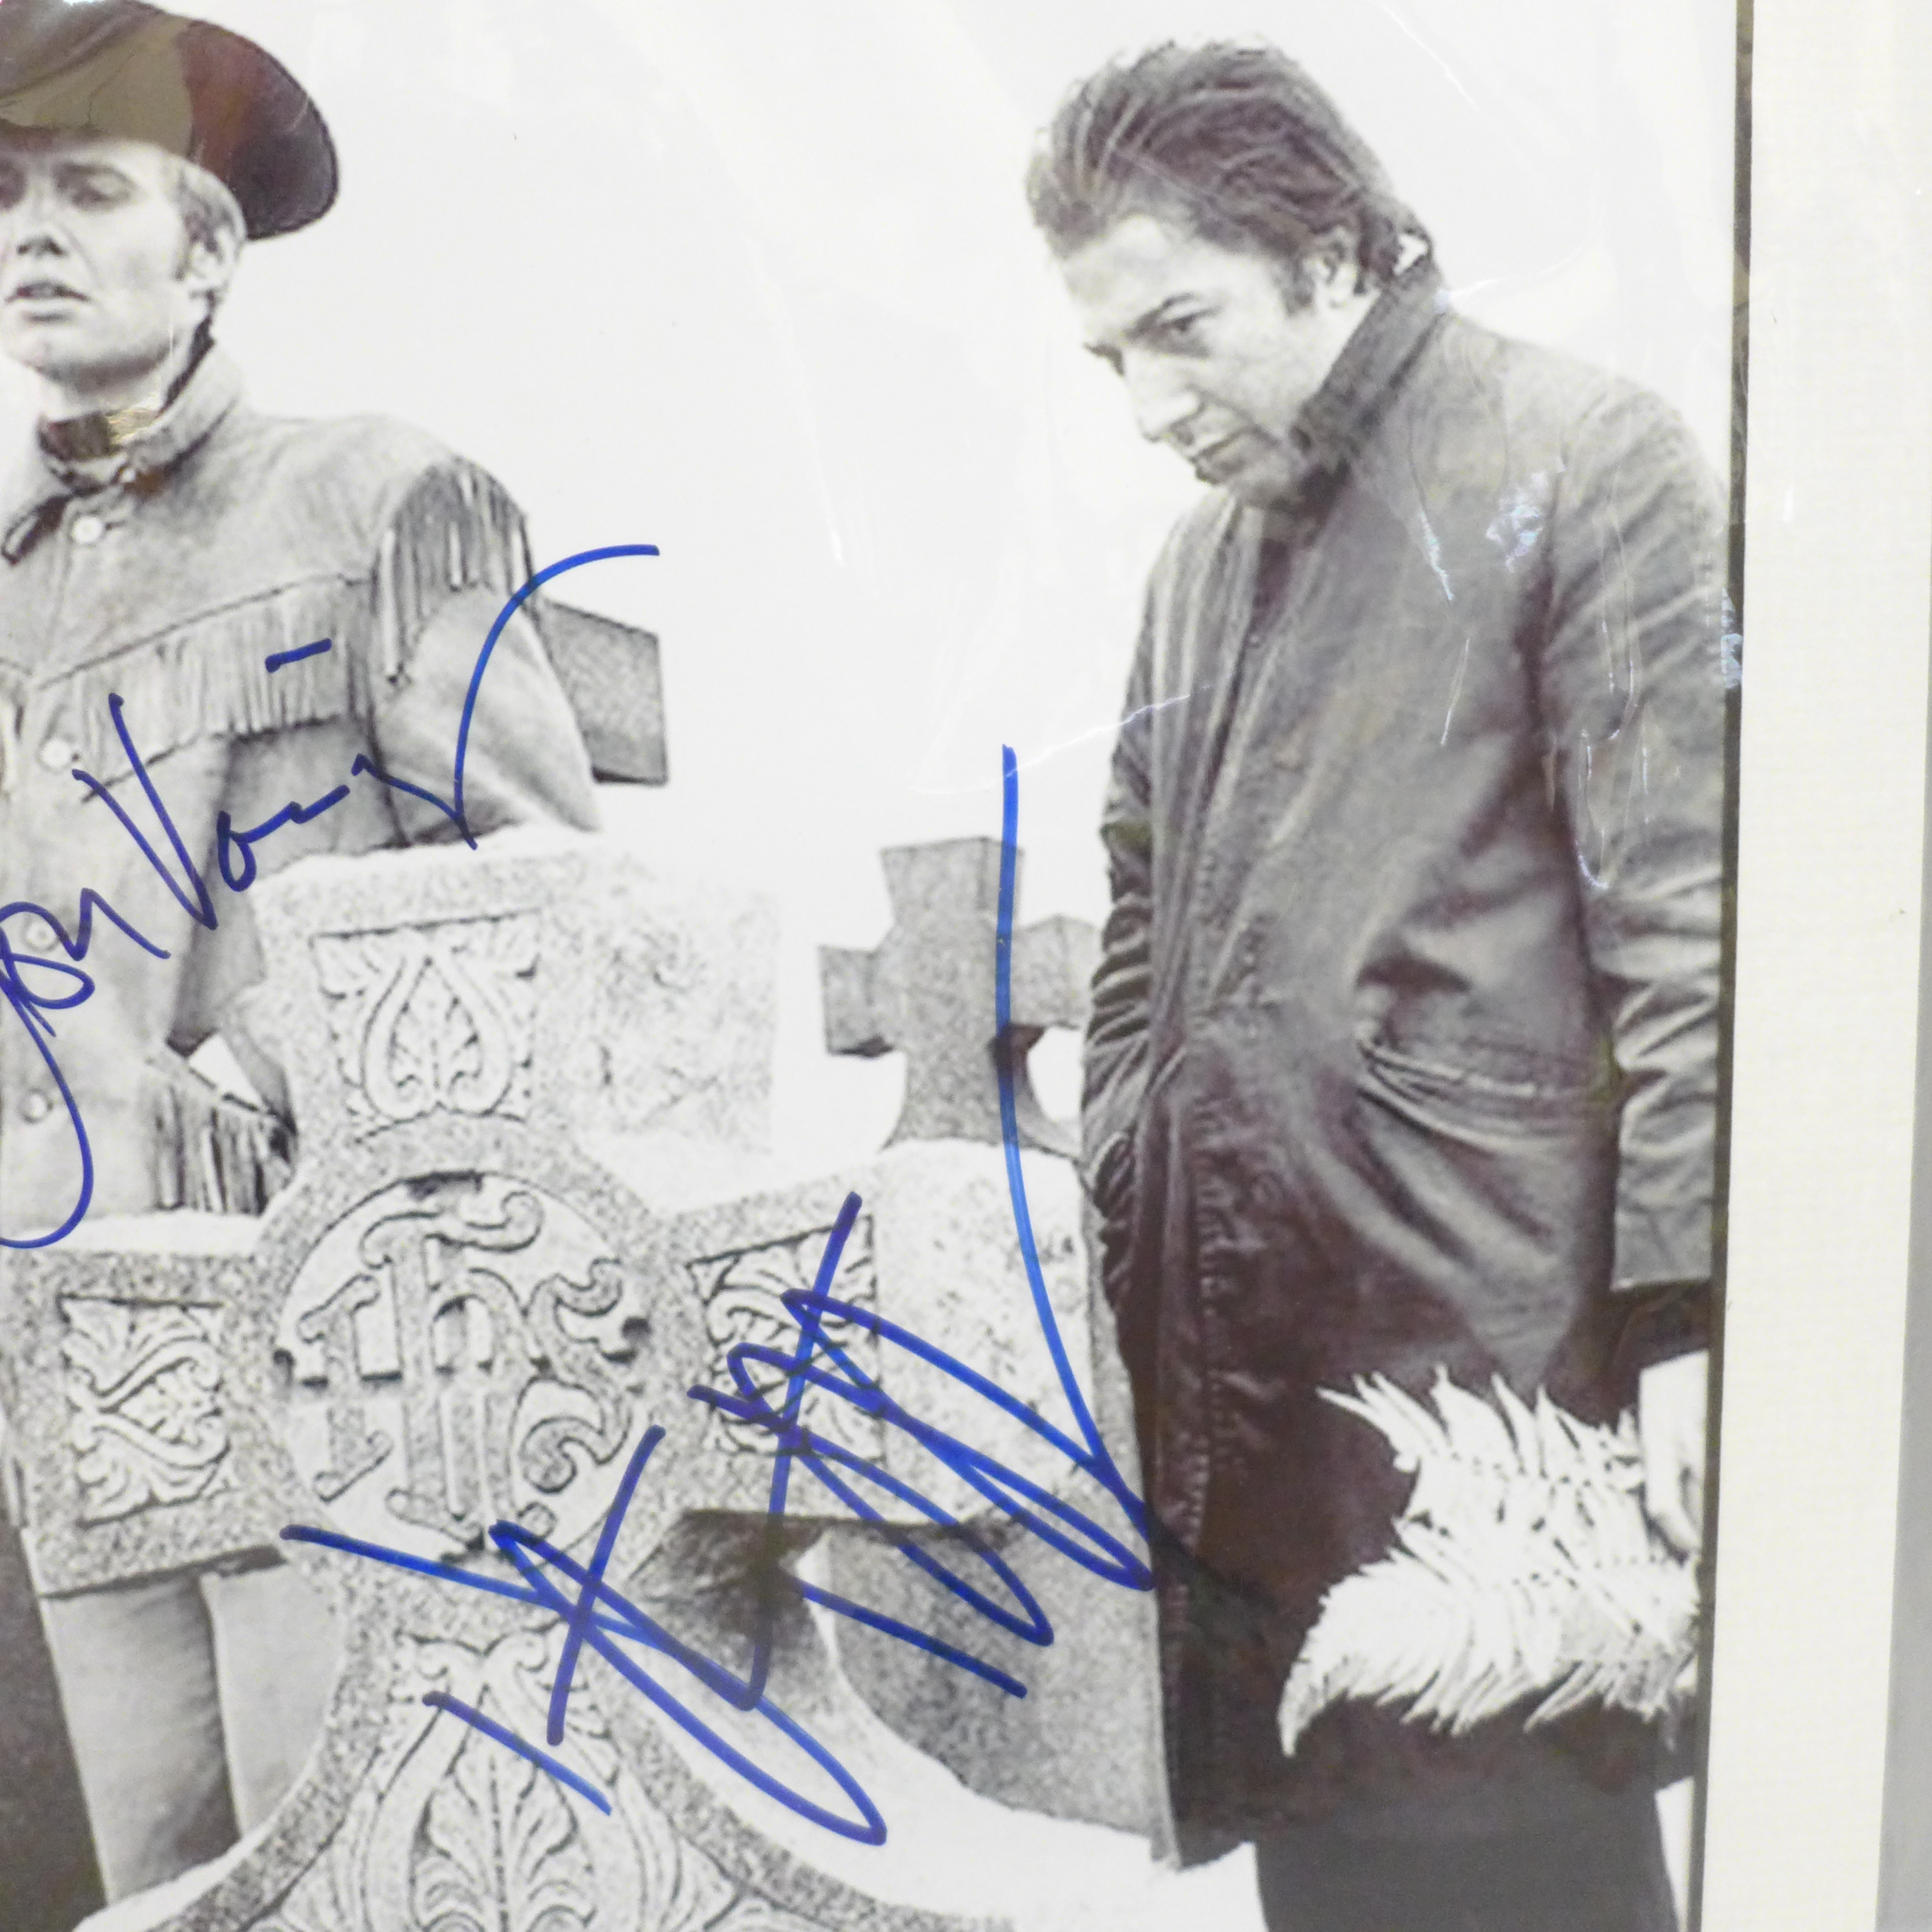 A Dustin Hoffman and John Voigt, Midnight Cowboy autographed photograph with Rutland Antiques - Image 3 of 4